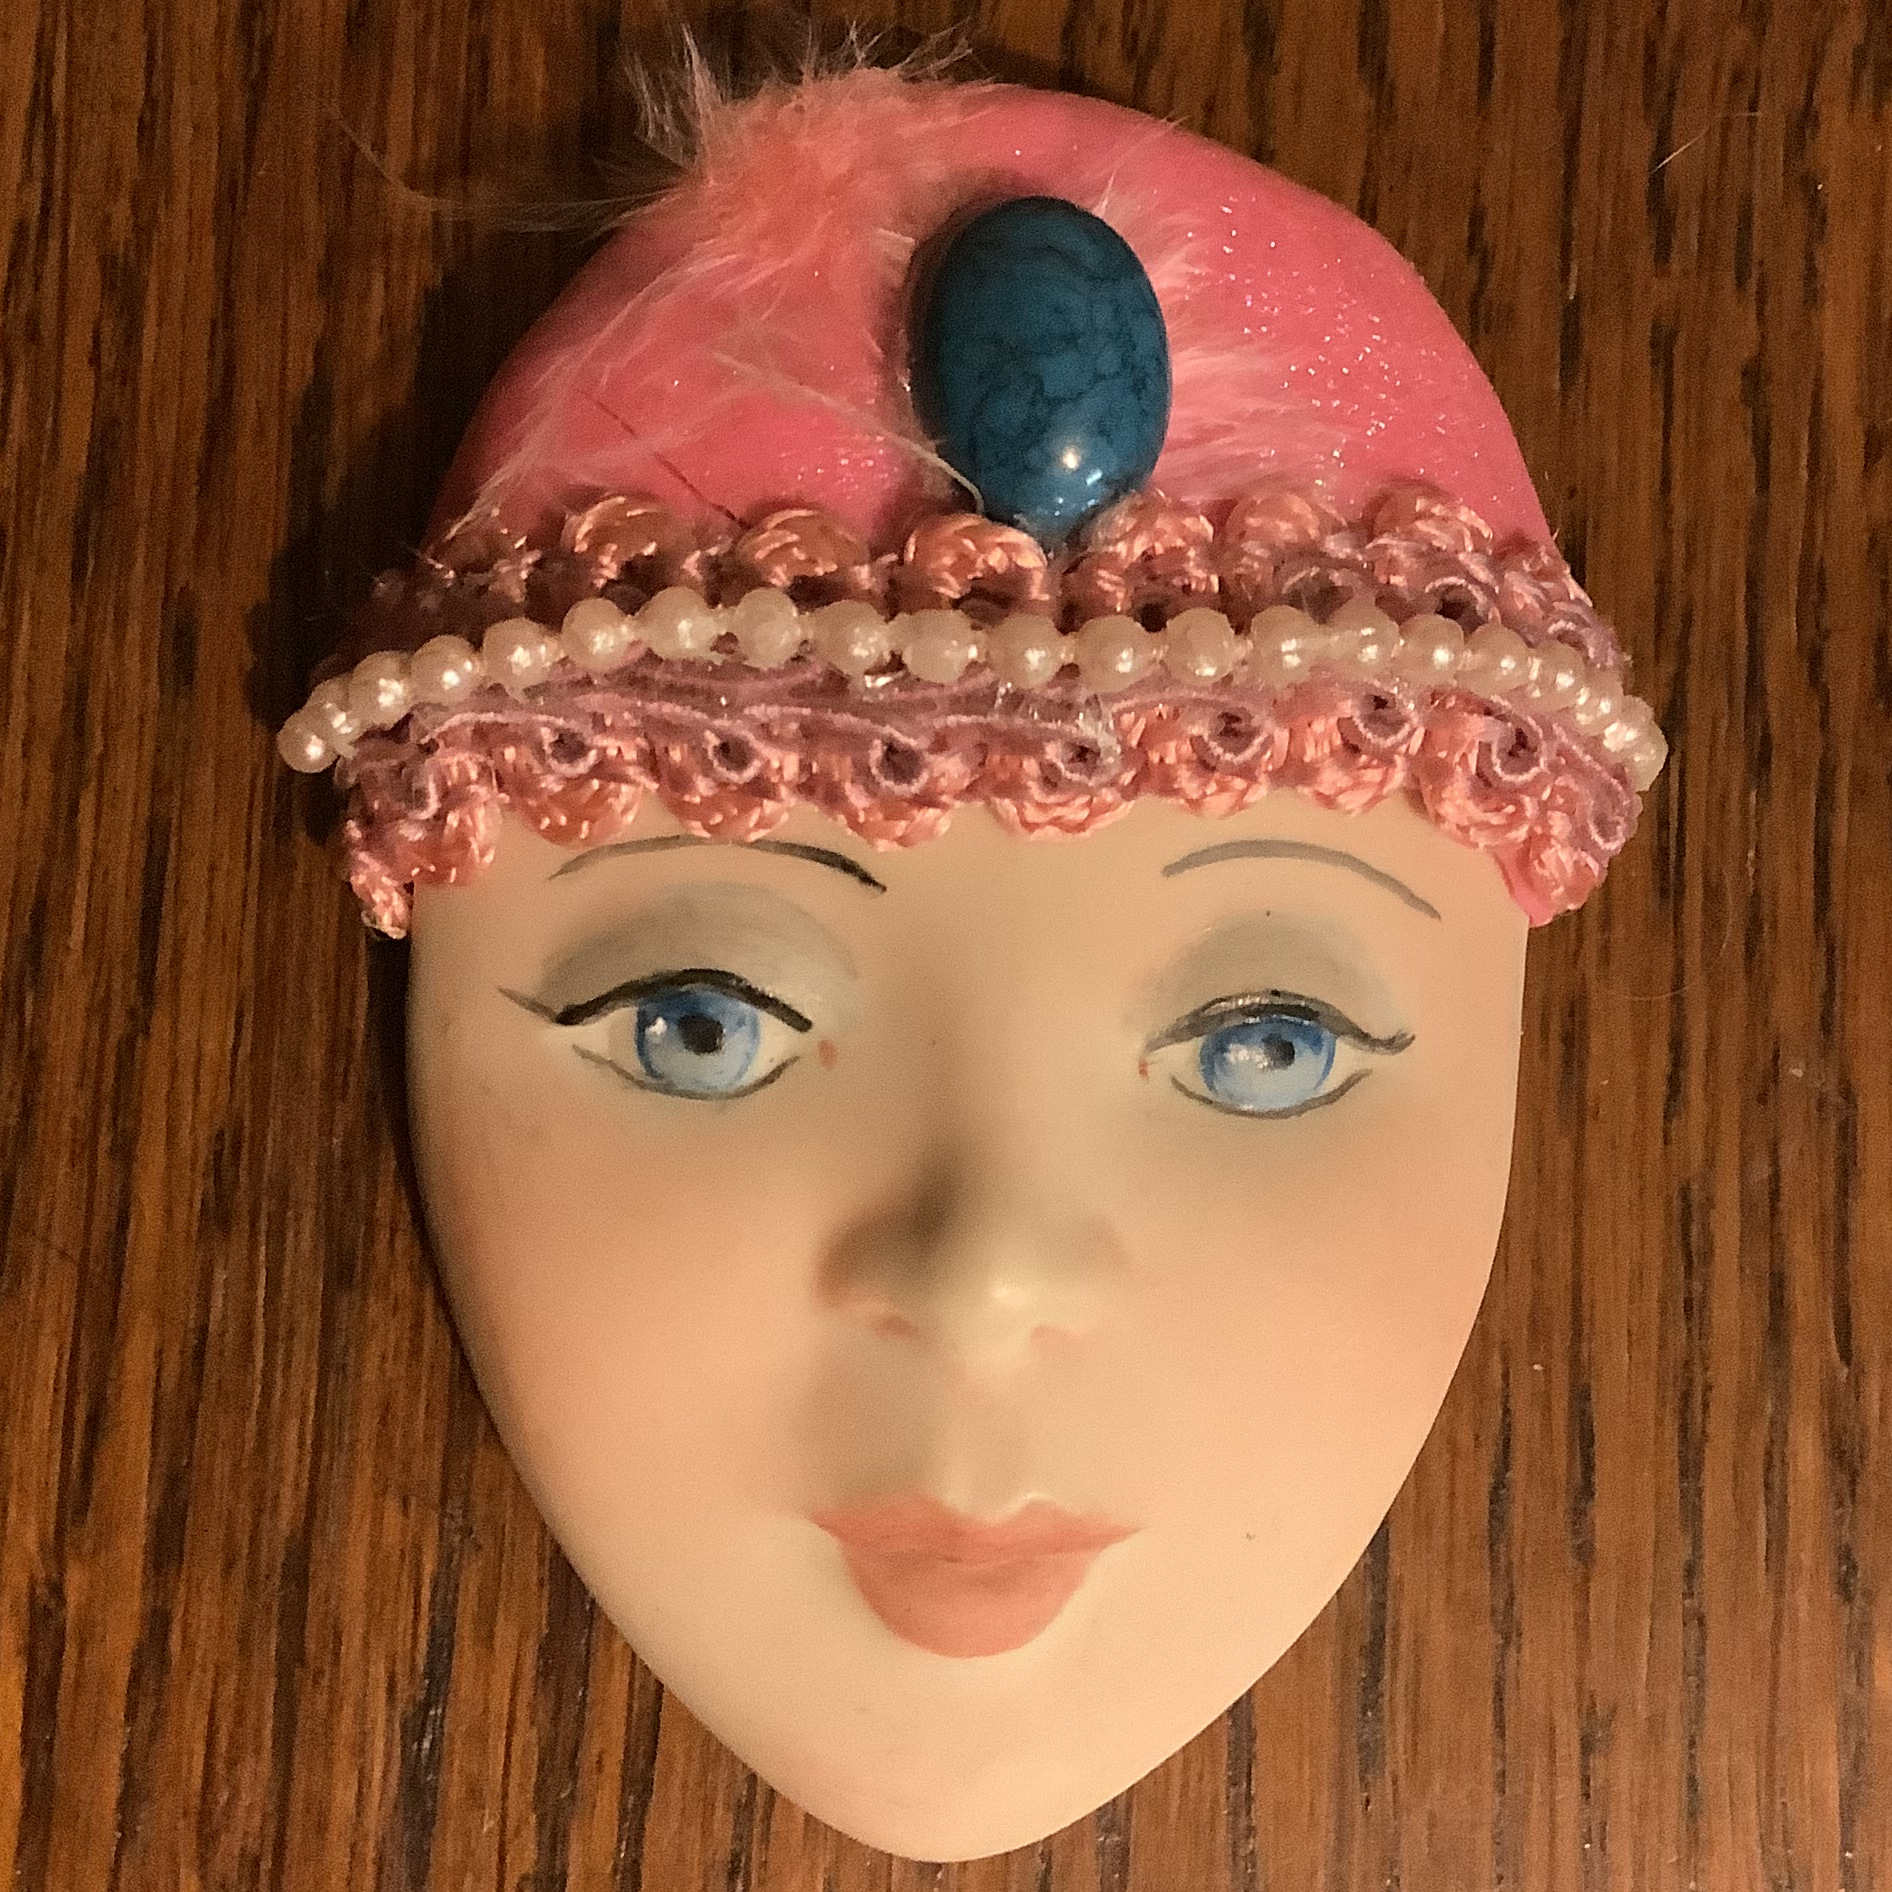 Brooch depicting a young, light-skinned, blue-eyed woman's face wearing a pink hat with beaded trim and large blue stone at forehead; visibly cracked